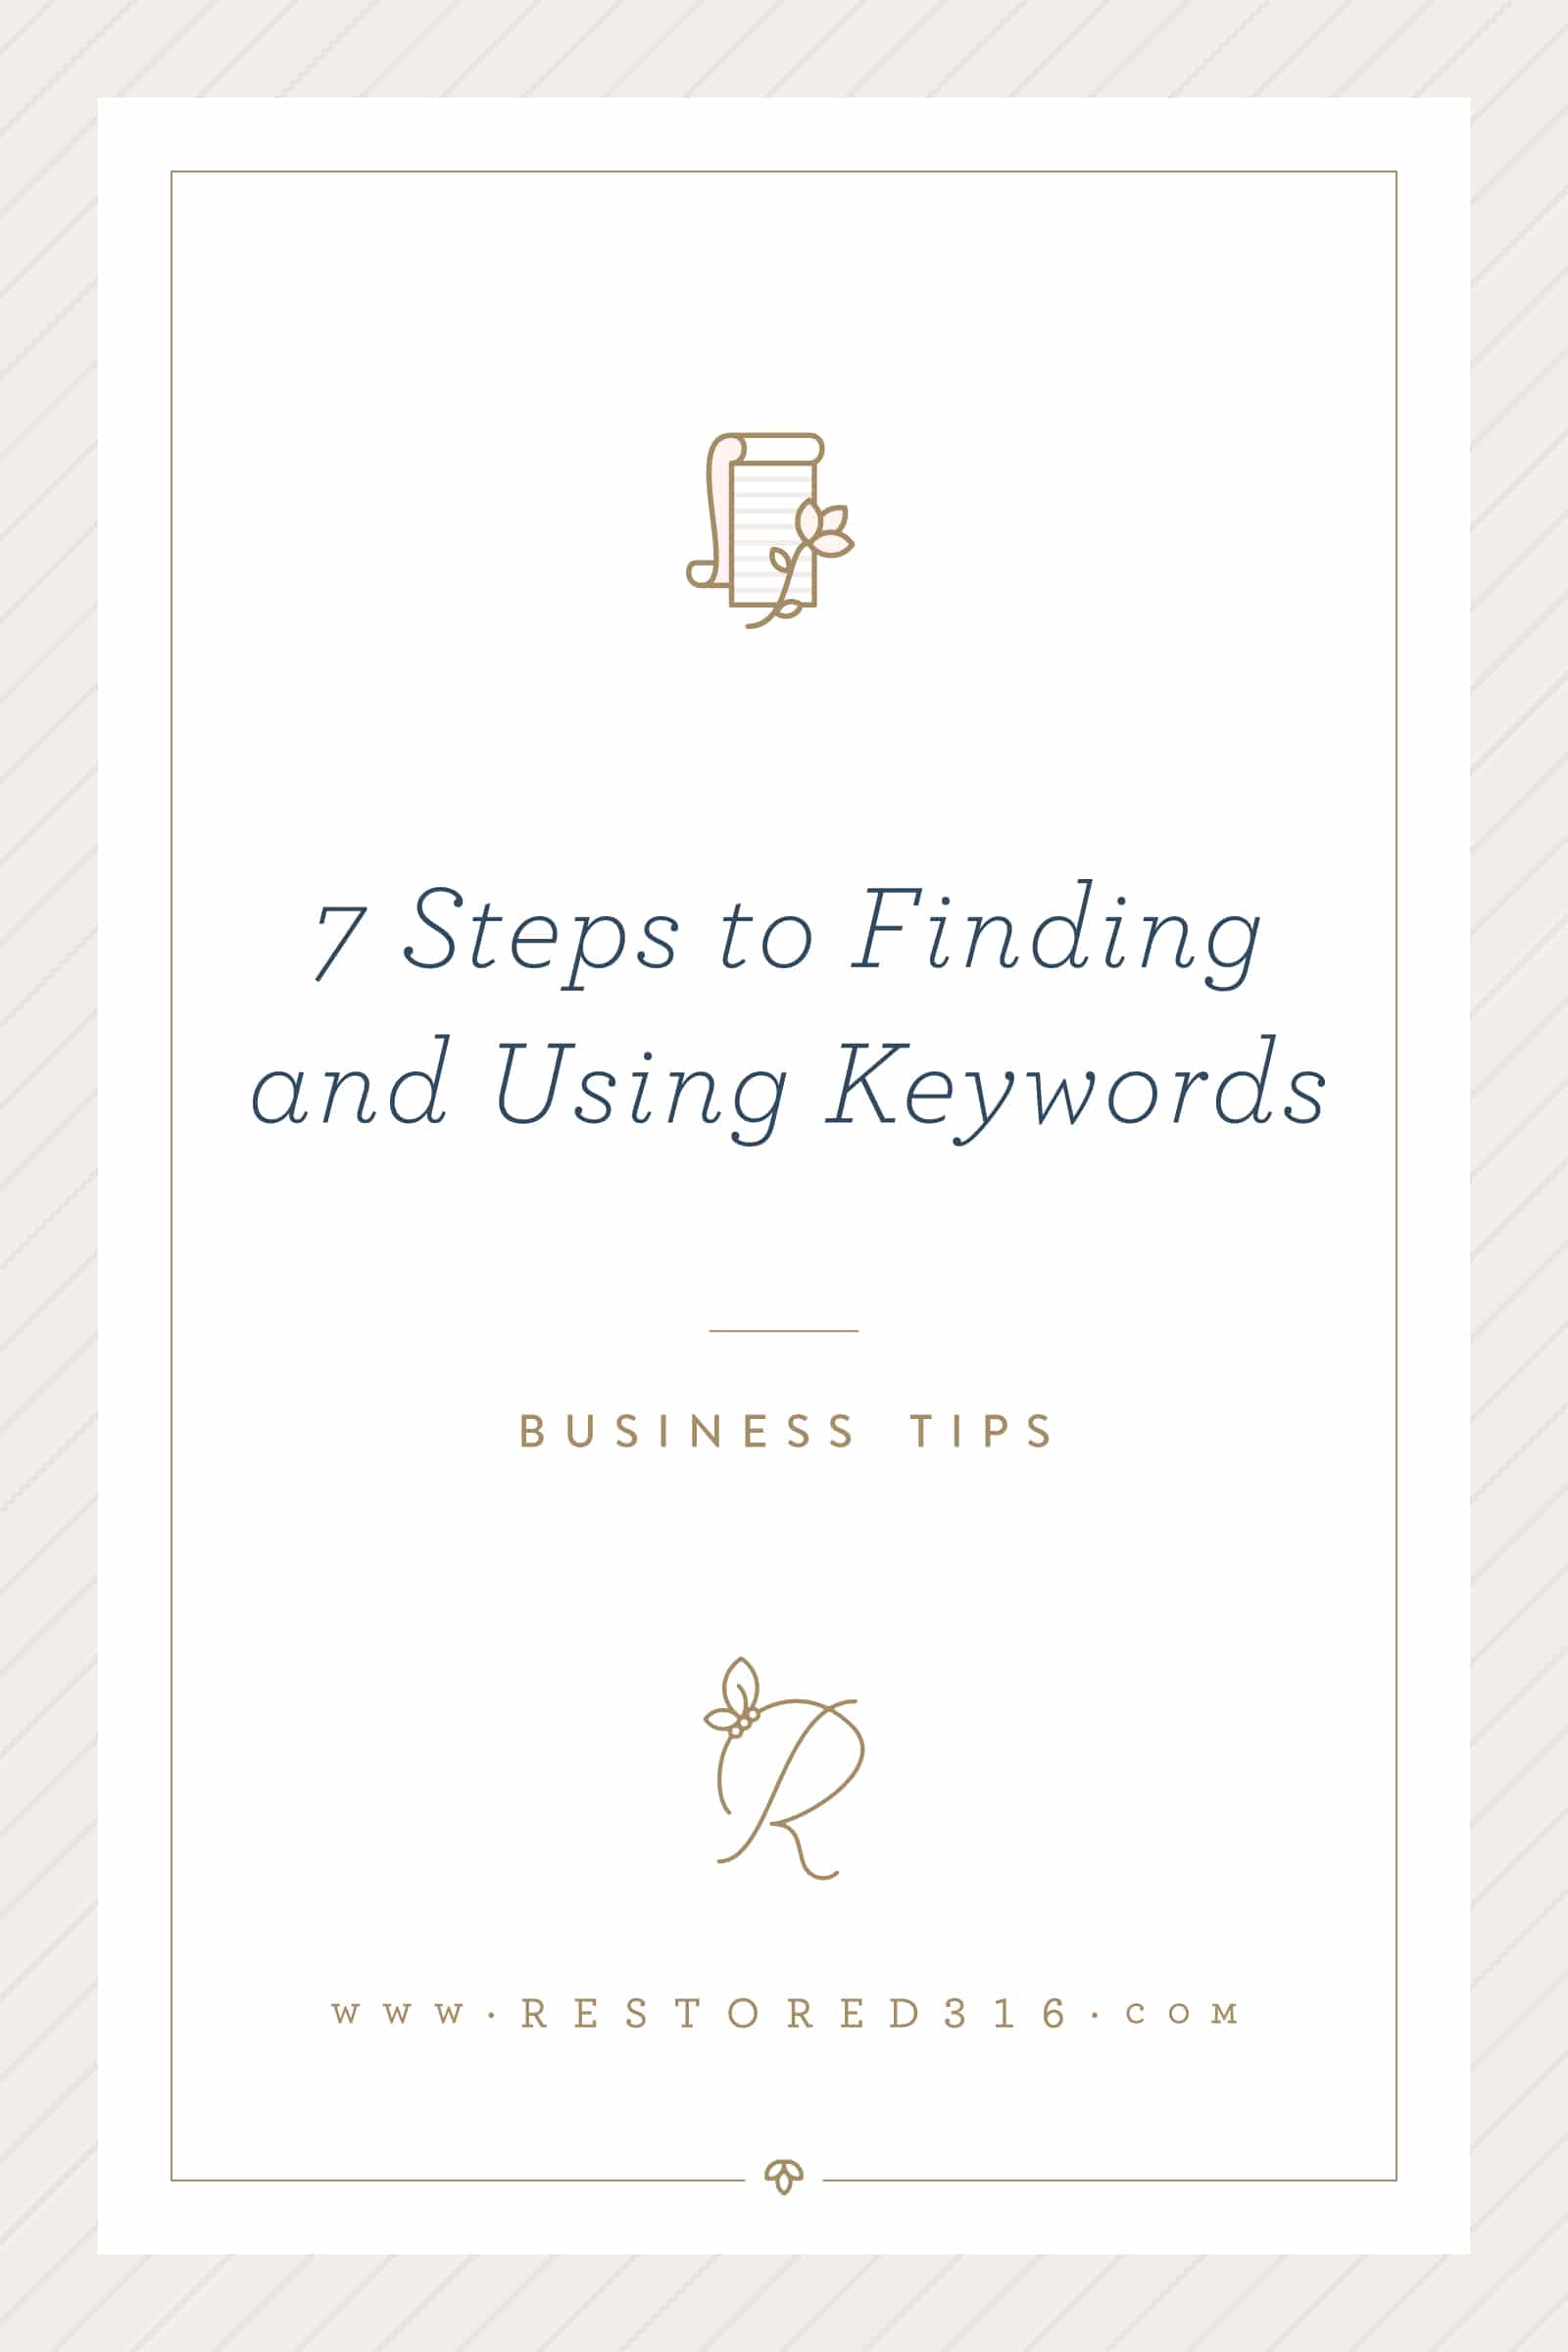 7 Steps to Finding and Using Keywords